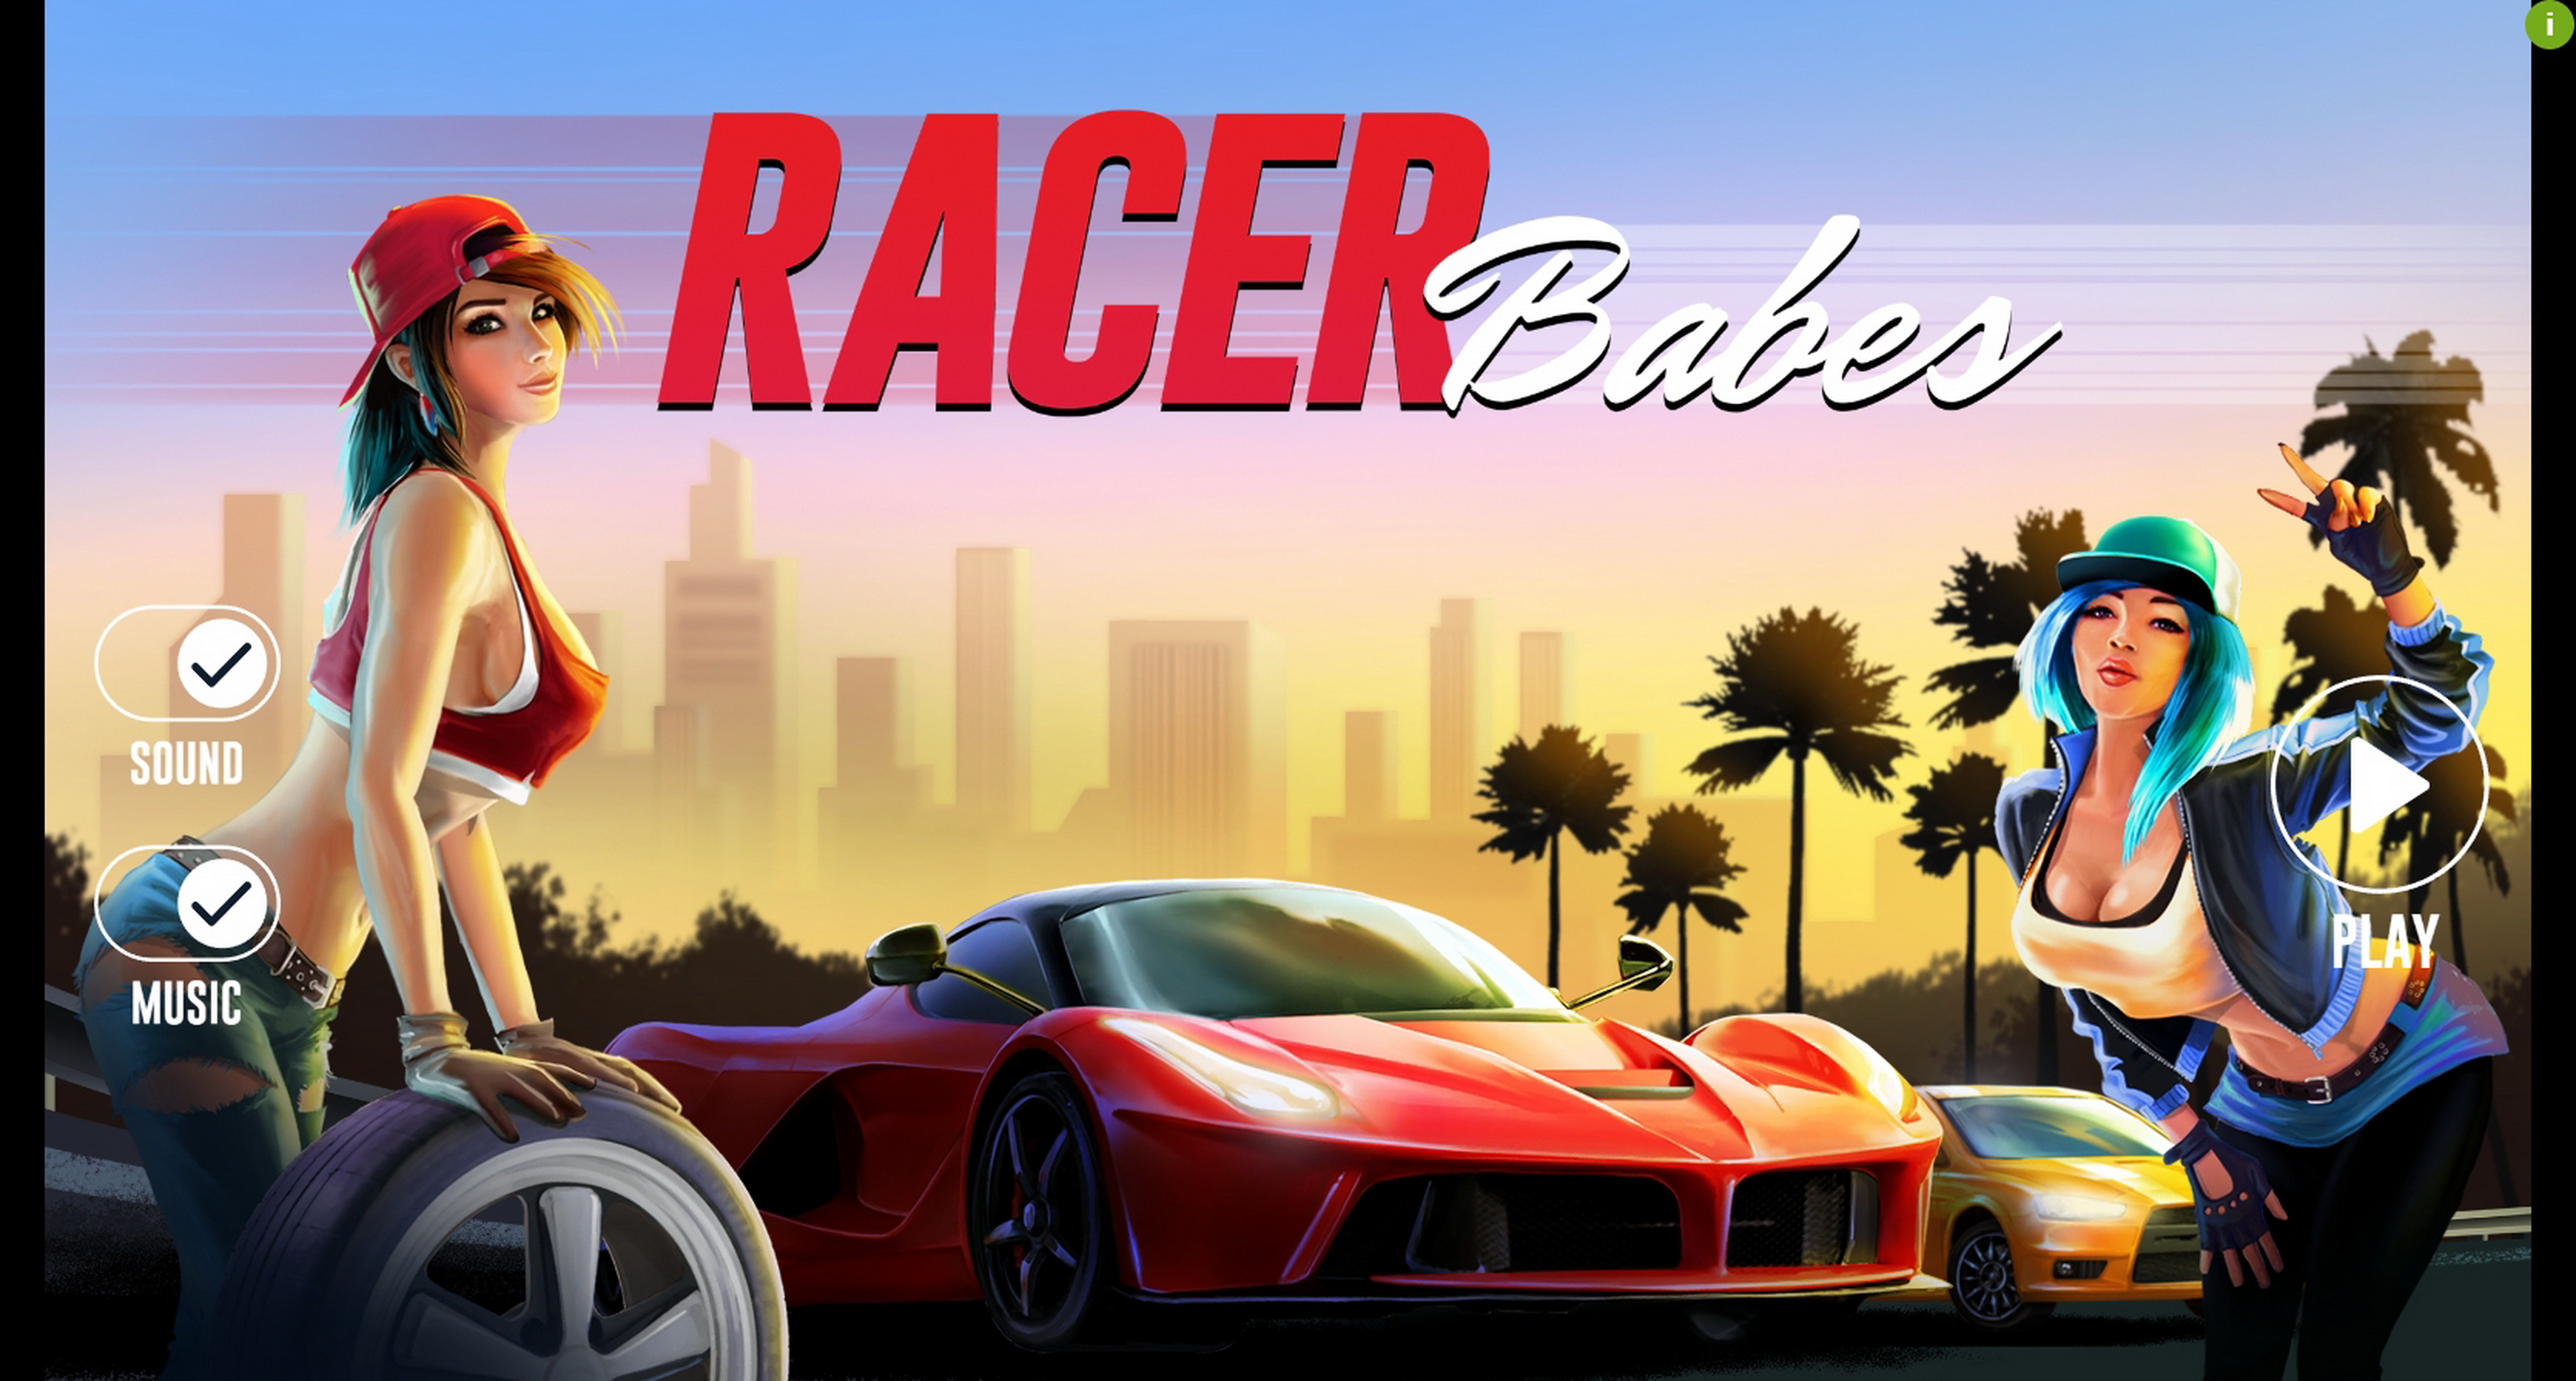 Play Racer Babes Free Casino Slot Game by Woohoo